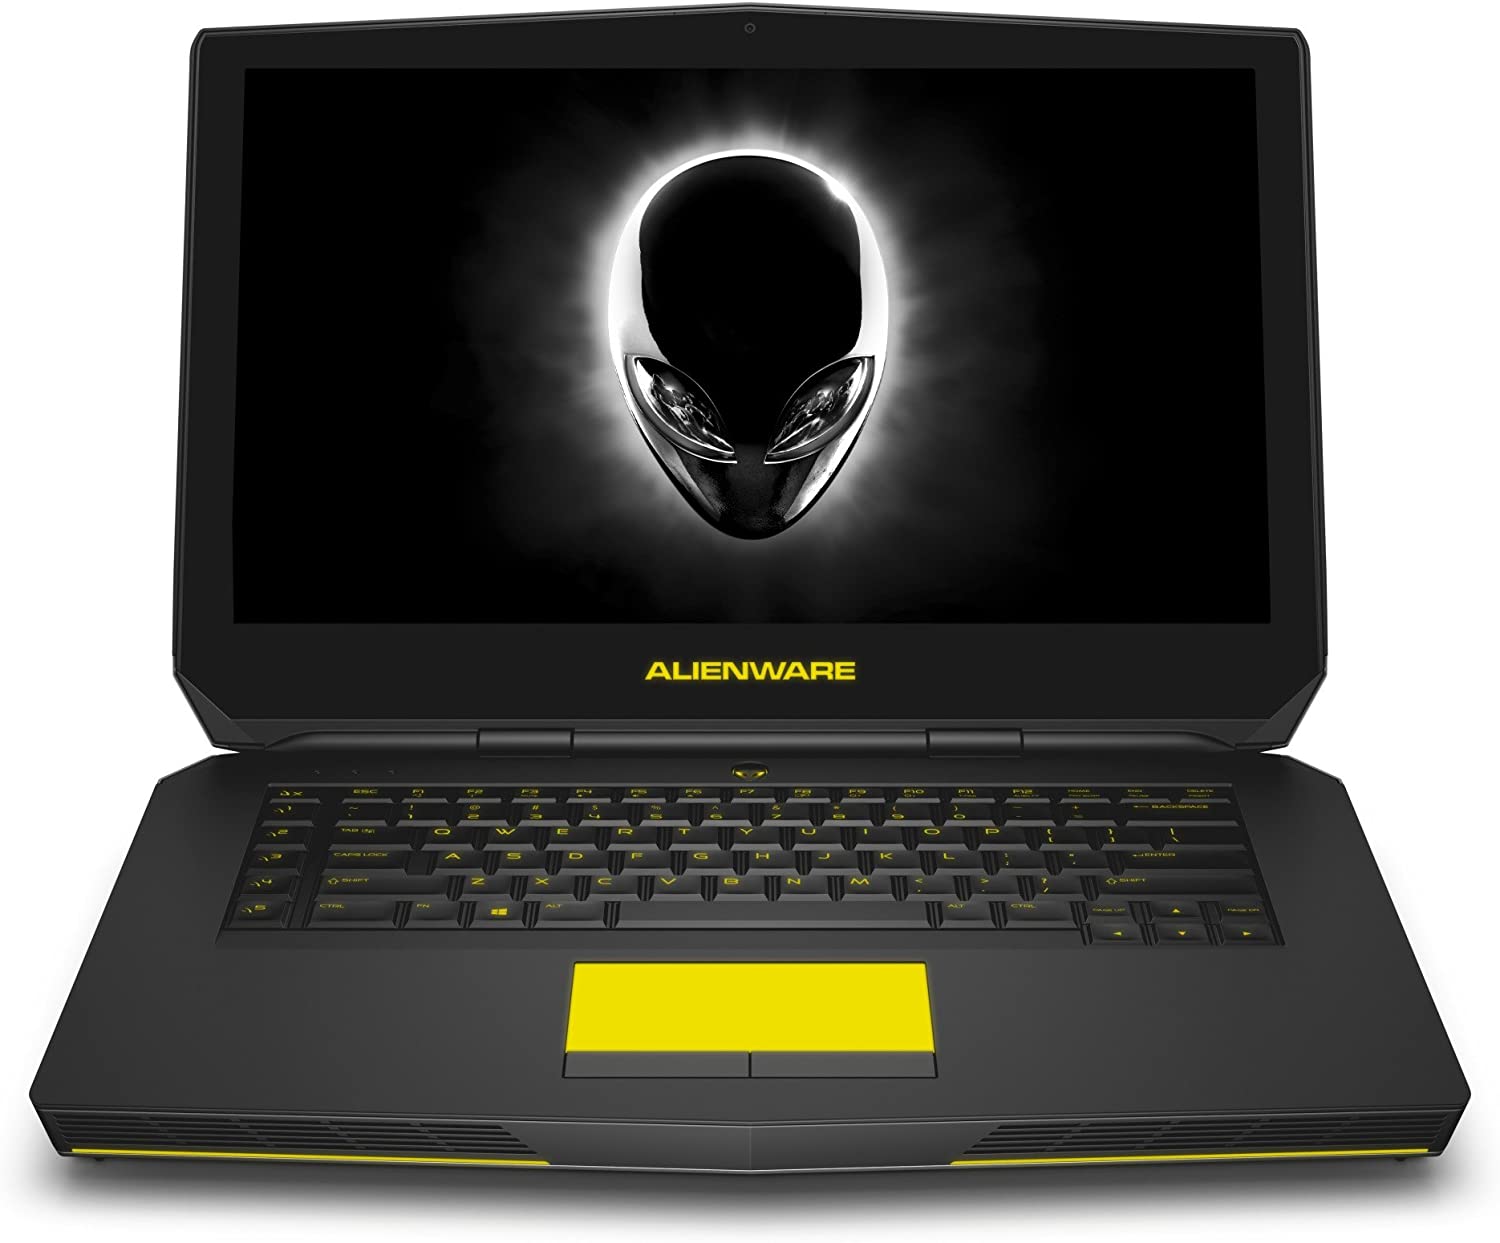 Recertified Dell Alienware 15 R2 15.6-Inch FHD Gaming Laptop ( Intel Core i7-6700HQ 2.6Ghz, 16GB RAM, 500GB HD, NVIDIA GeForce GTX 970M 3GB, Windows 10 Home ) Grade A - image 4 of 8